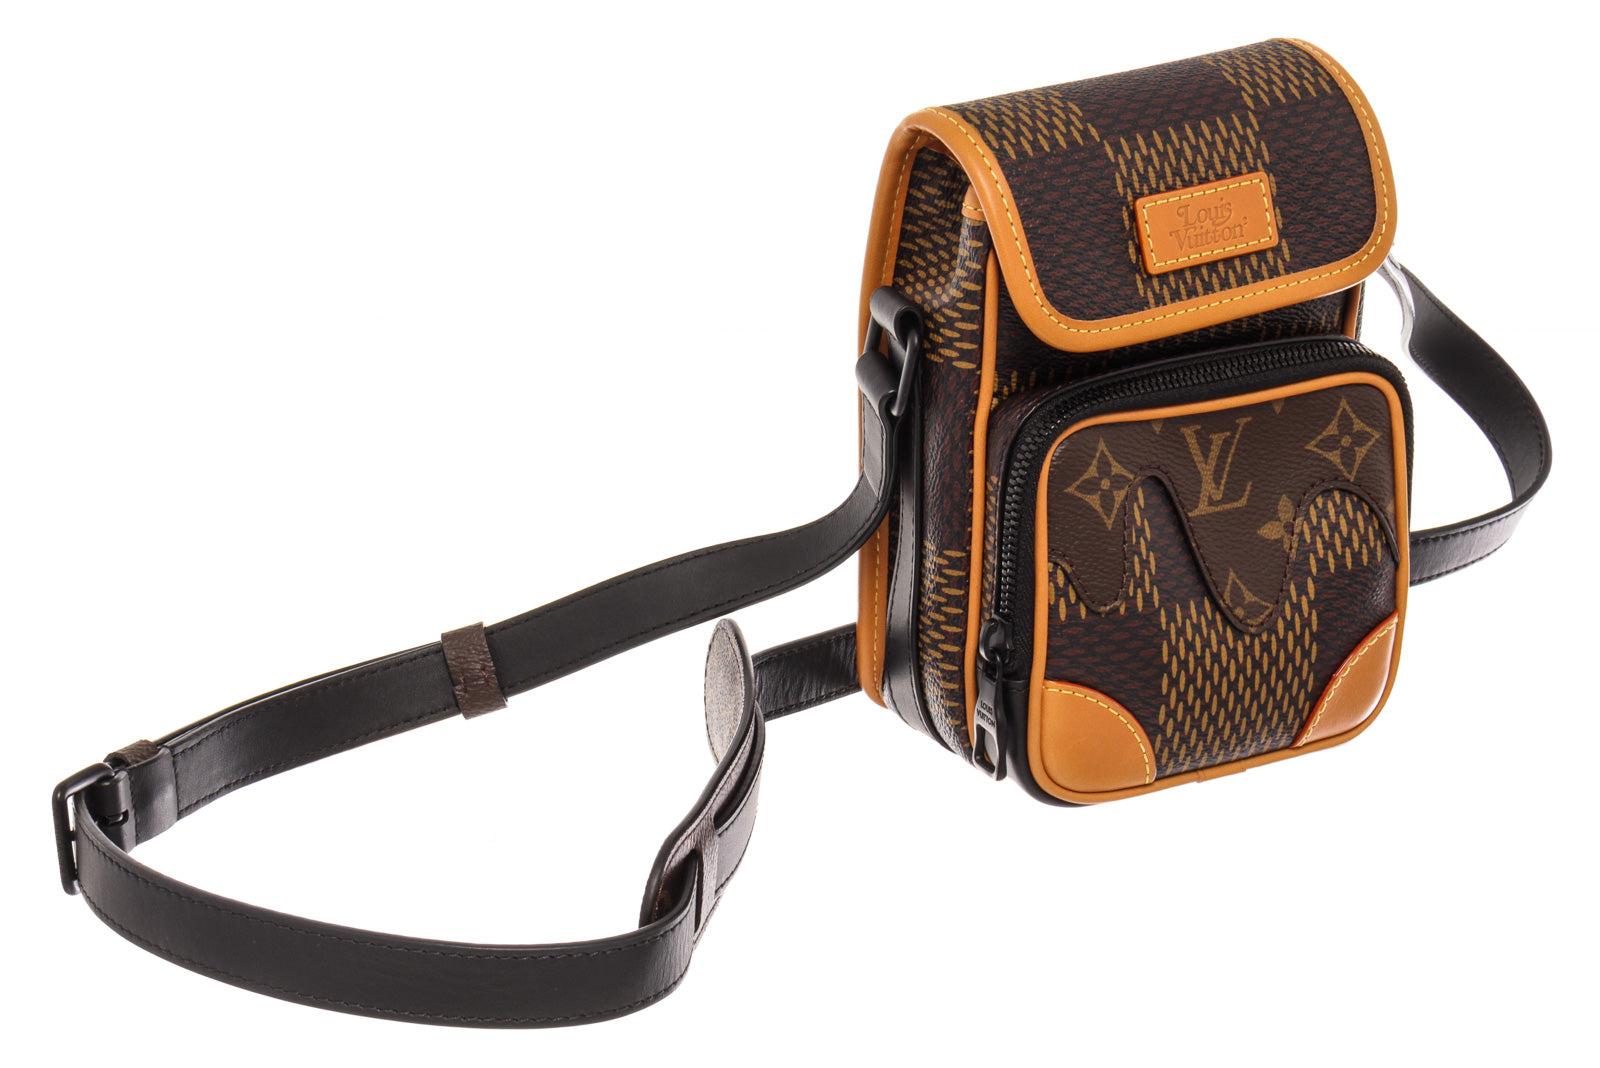 Louis Vuitton Nigo Amazone Nano Messenger Bag features giant Damier Ebene coated canvas and drip brown Monogram coated canvas at the front pocket, brown textile lining, cowhide leather trim, matte-black hardware, adjustable shoulder strap and flap